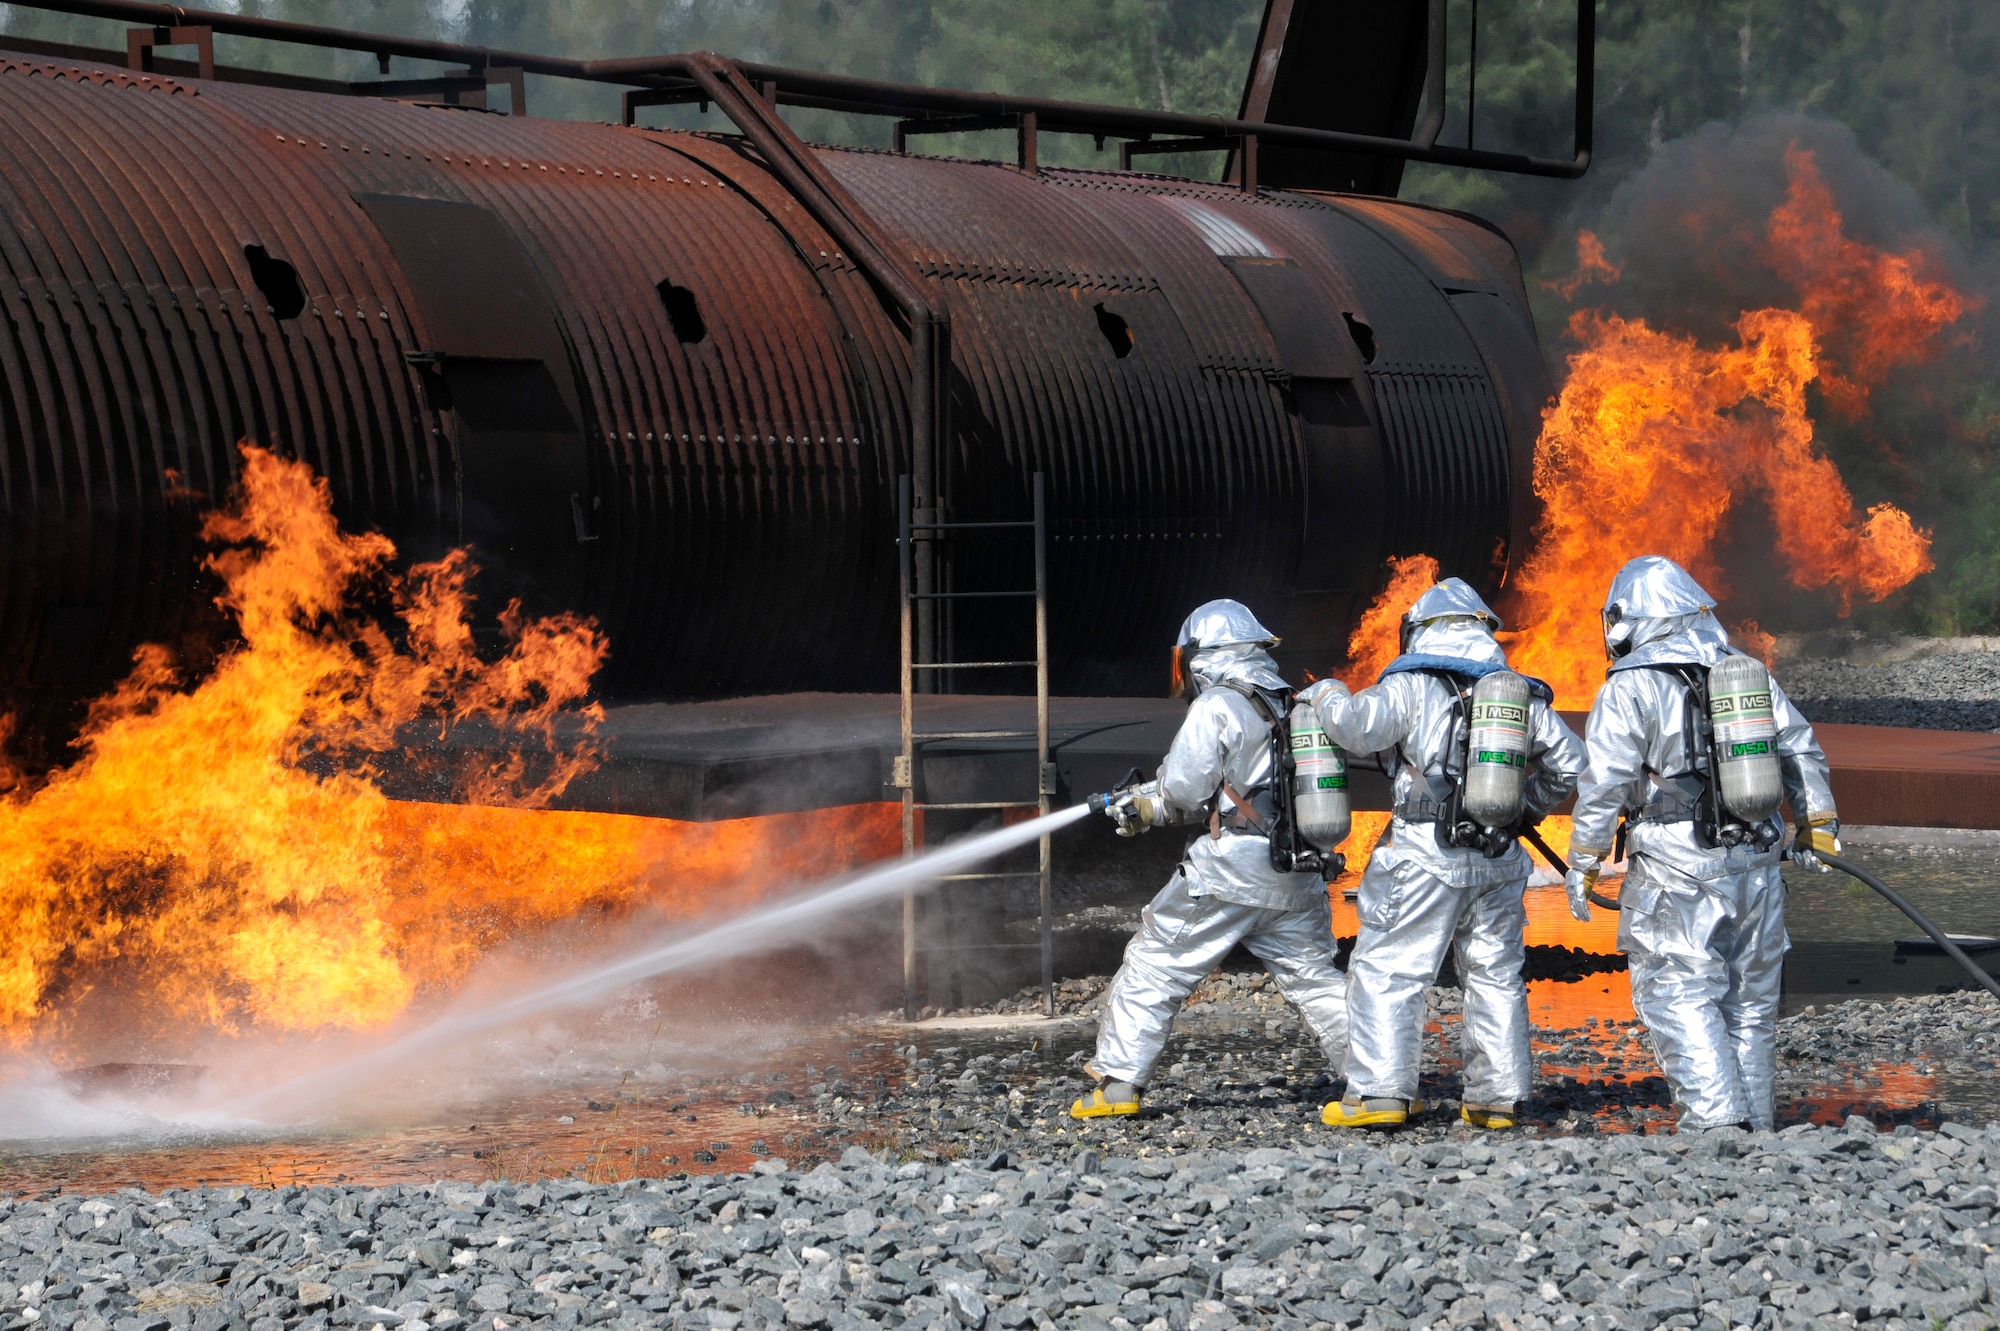 Members of Homestead Air Reserve Base, Fla.’s Fire Department extinguish a fire outside the burning fuselage of a mock aircraft during aircraft live fire training at Homestead ARB May 15. Fires can heat up the mock aircraft to approximately 1,200 degrees. The aircraft live fire training consists of responding to the fire, setting up on the aircraft, deploying hose lines, and attacking and extinguishing the fire. (U.S. Air Force photo/Senior Airman Nicholas Caceres)